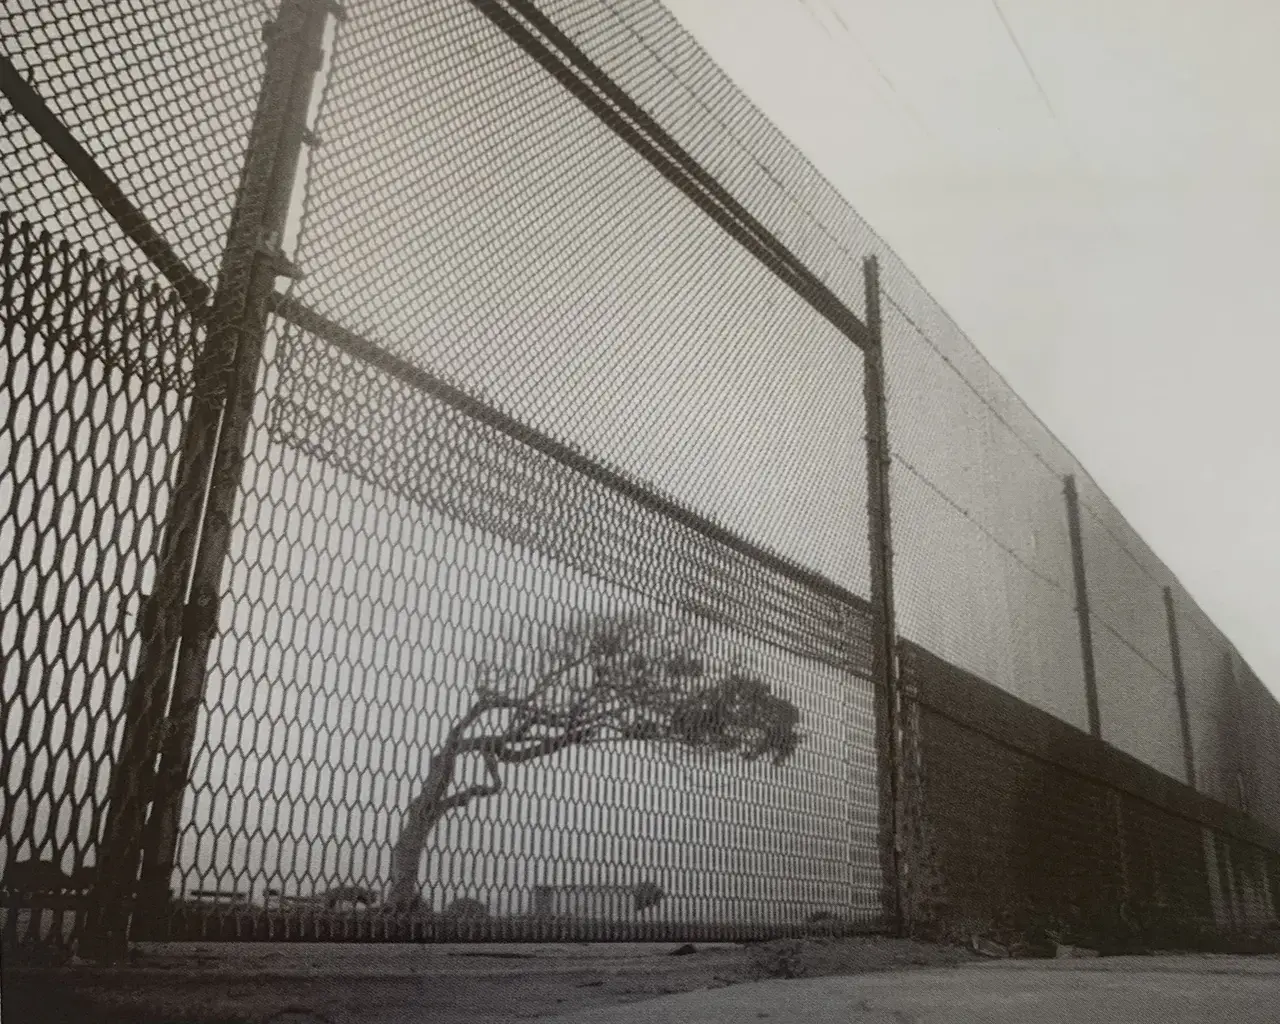 Black and white photo by Enrique Bostelmann depicting a tree bending in the wind behind a tall fence.